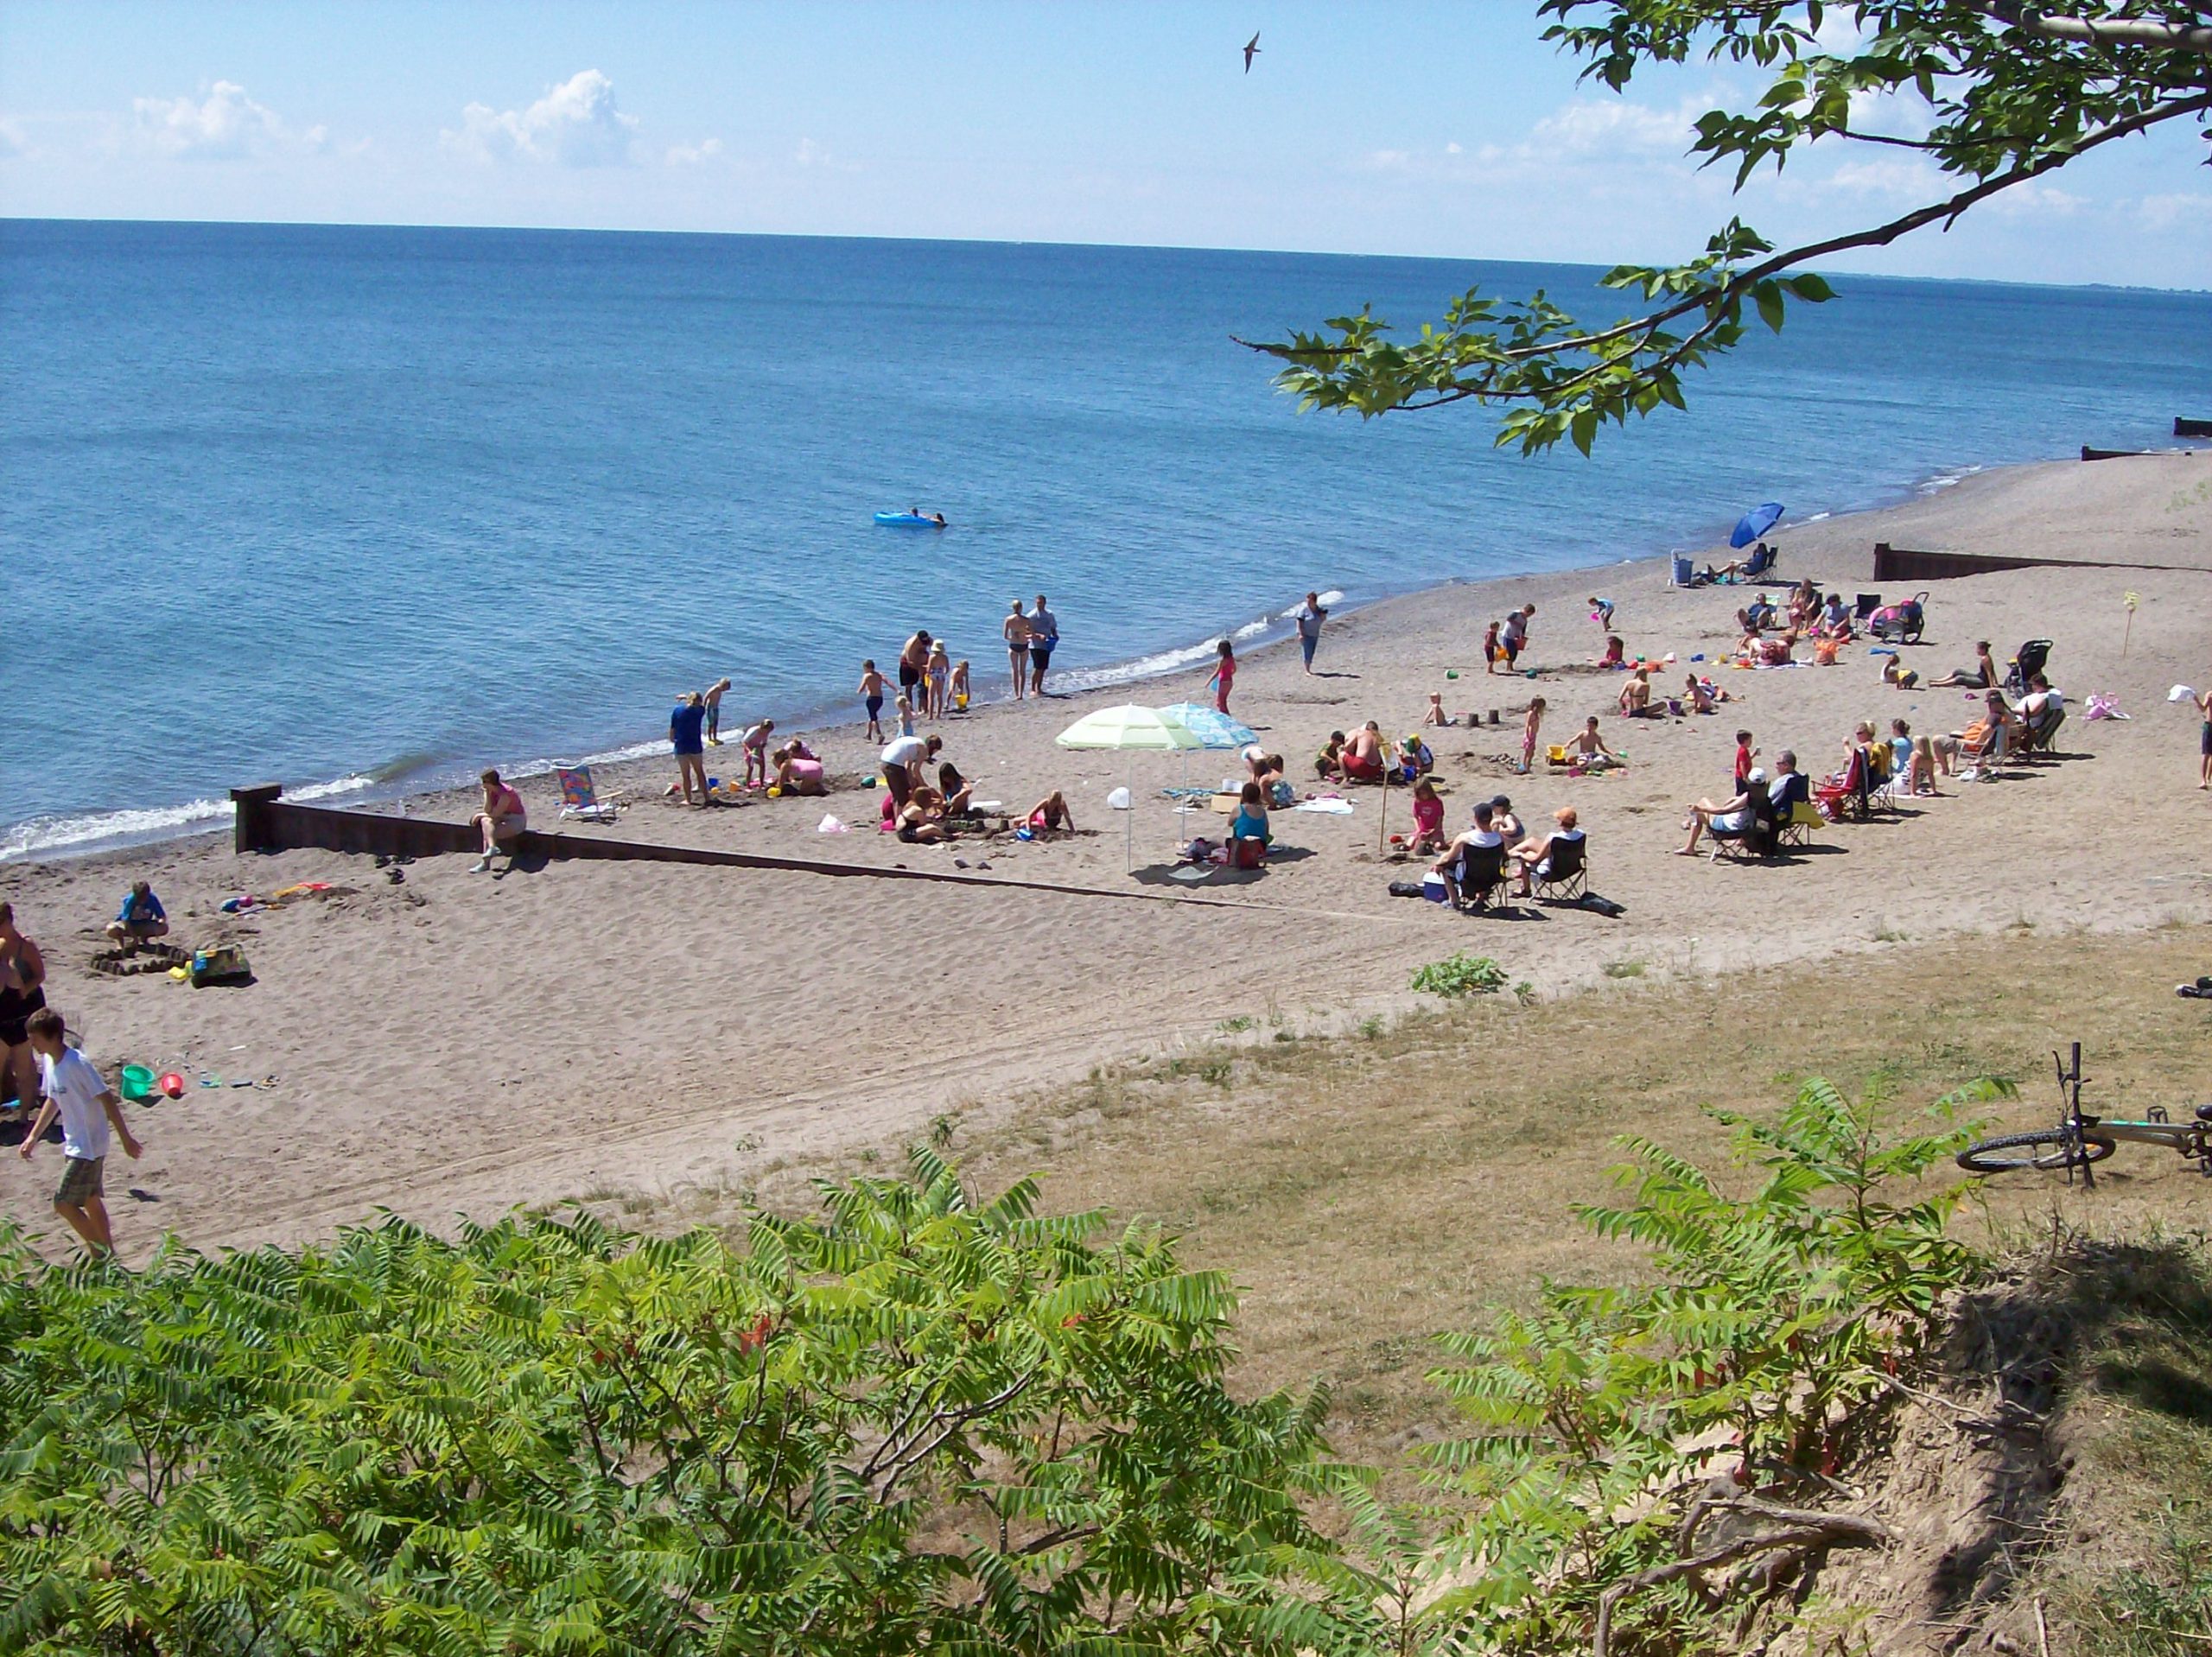 Dozens of campers relaxing and playing on the sandy beach